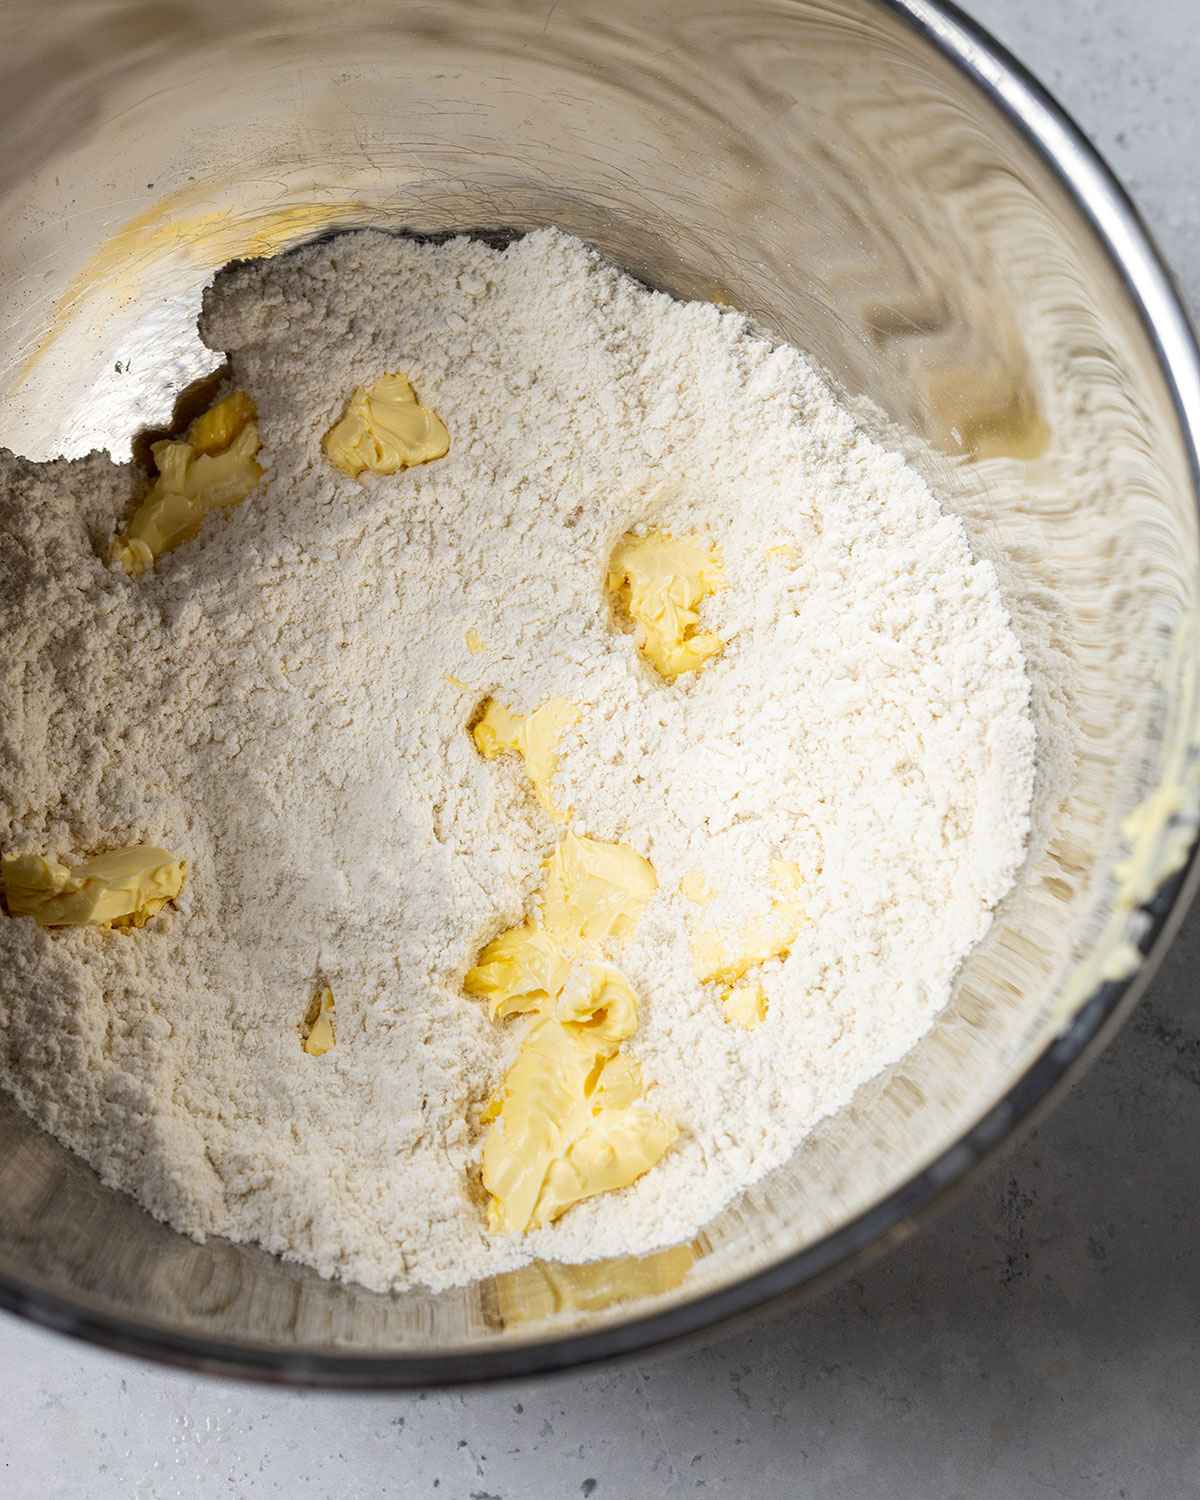 flour and butter in a mixing bowl, the butter is in small chunks